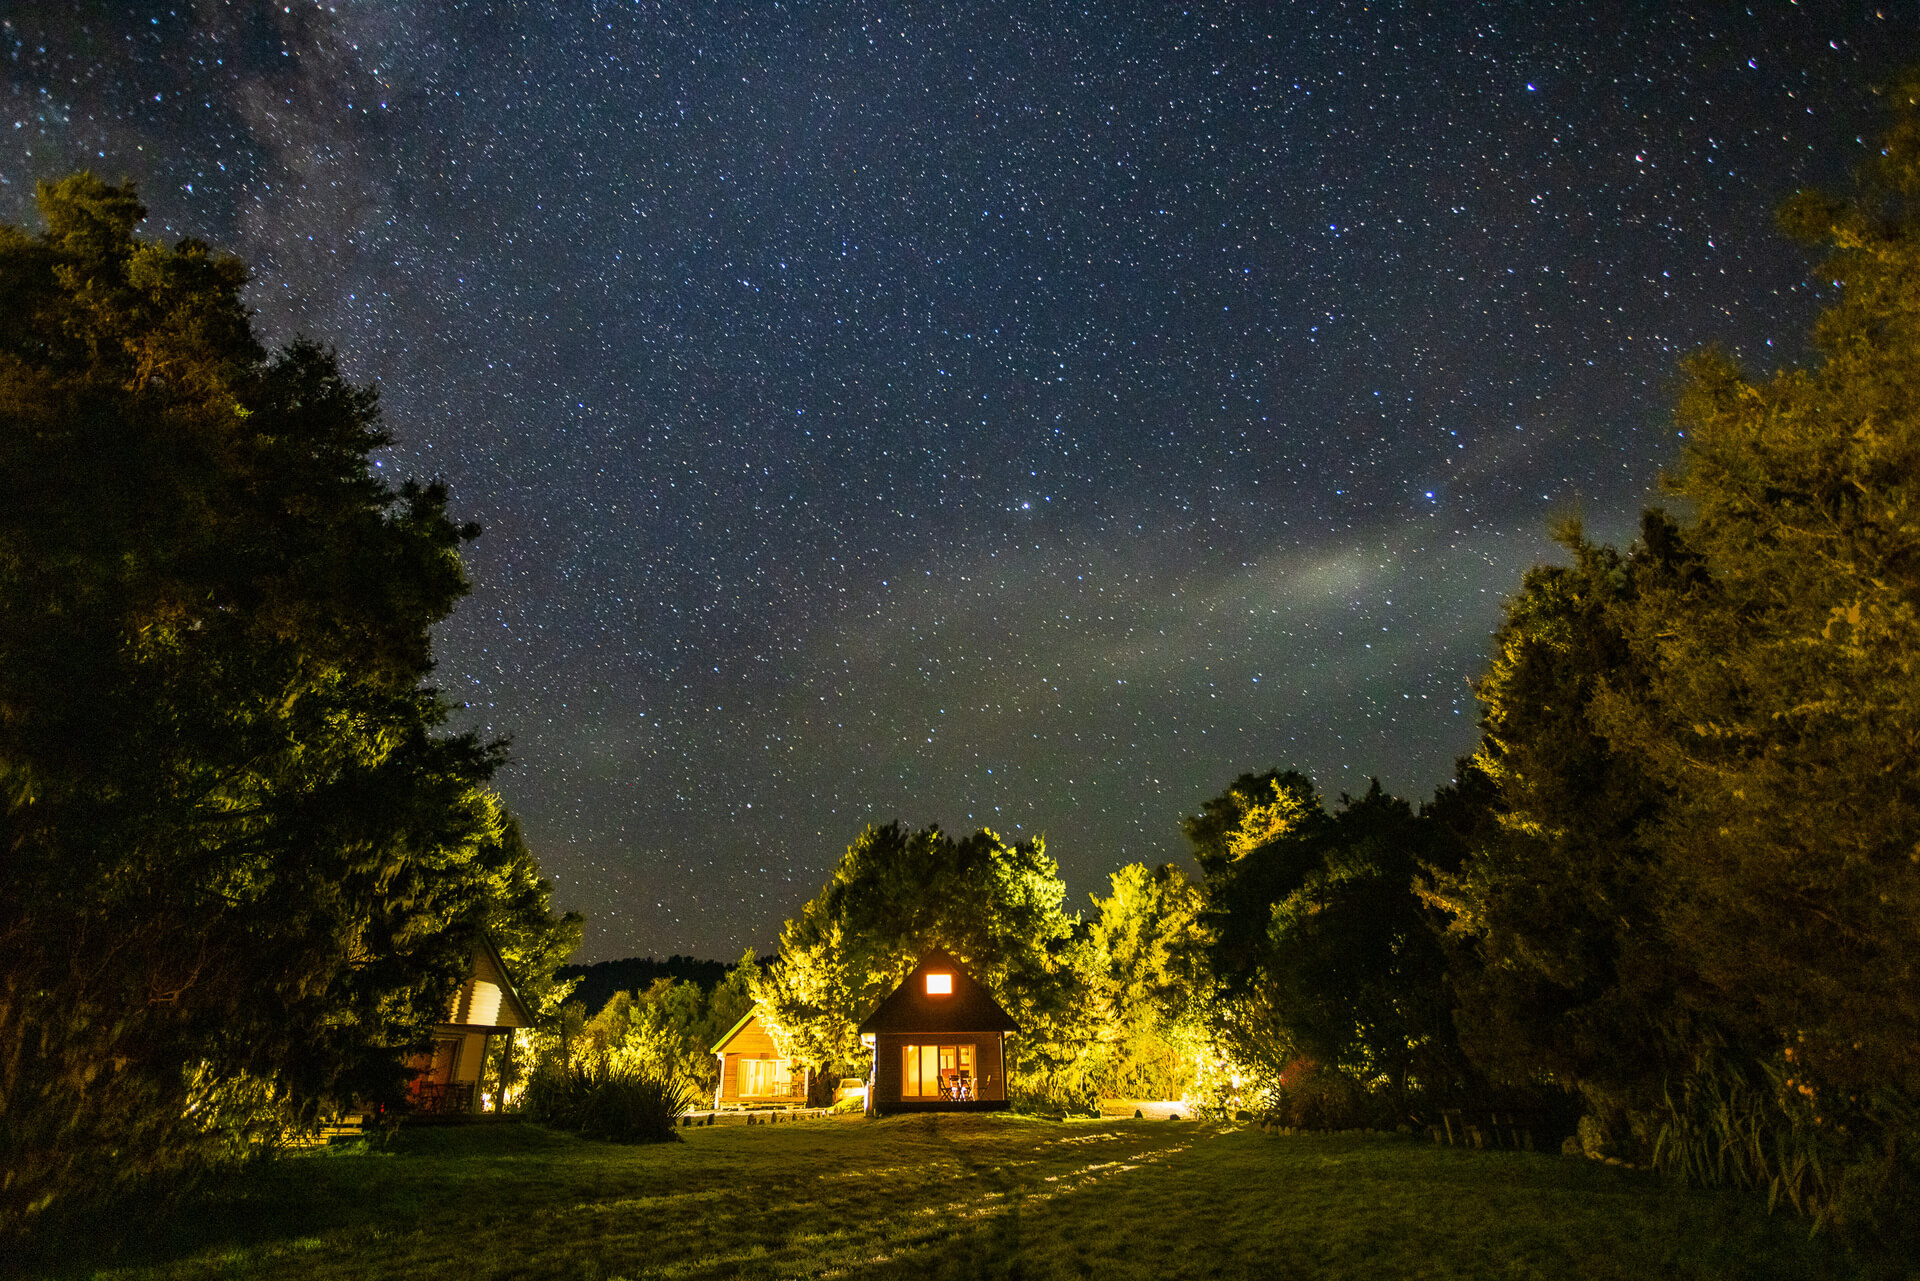 Chalets with lights on surrounded by trees and starry skies above